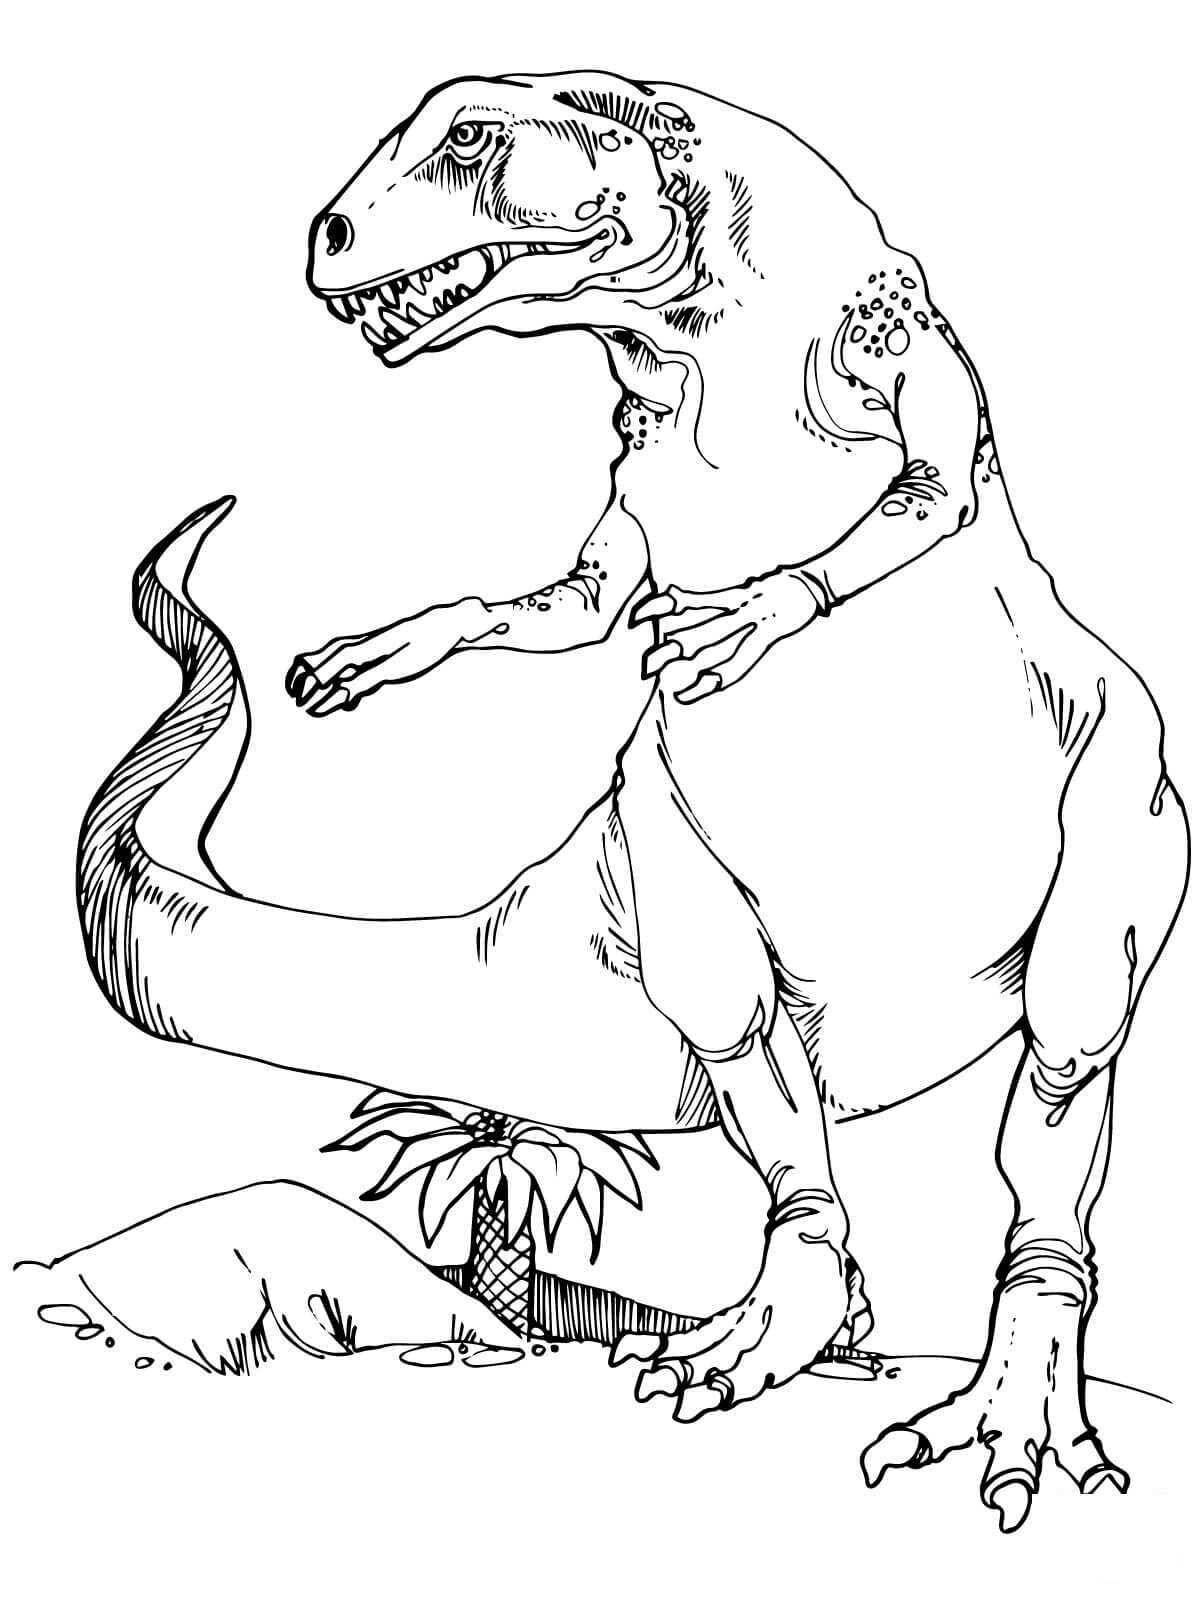 Teratosaurus Dinosaur Standing Up Coloring Pages